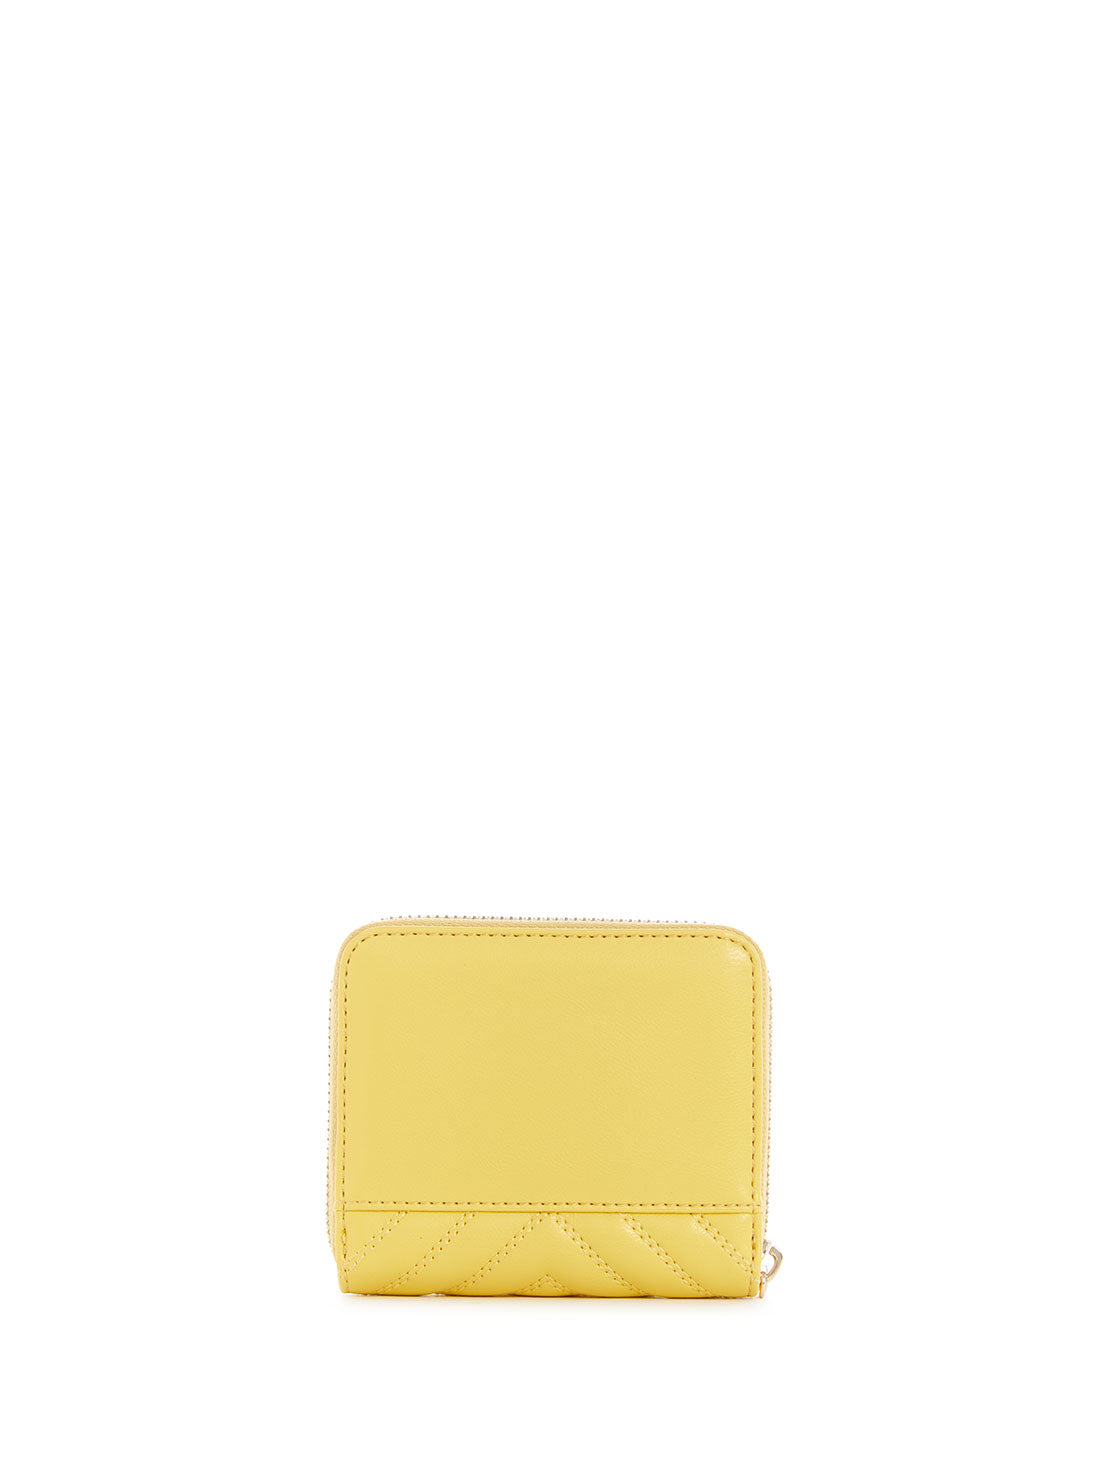 GUESS Women's Yellow Keillah Quilted Small Wallet QG869037 Back View